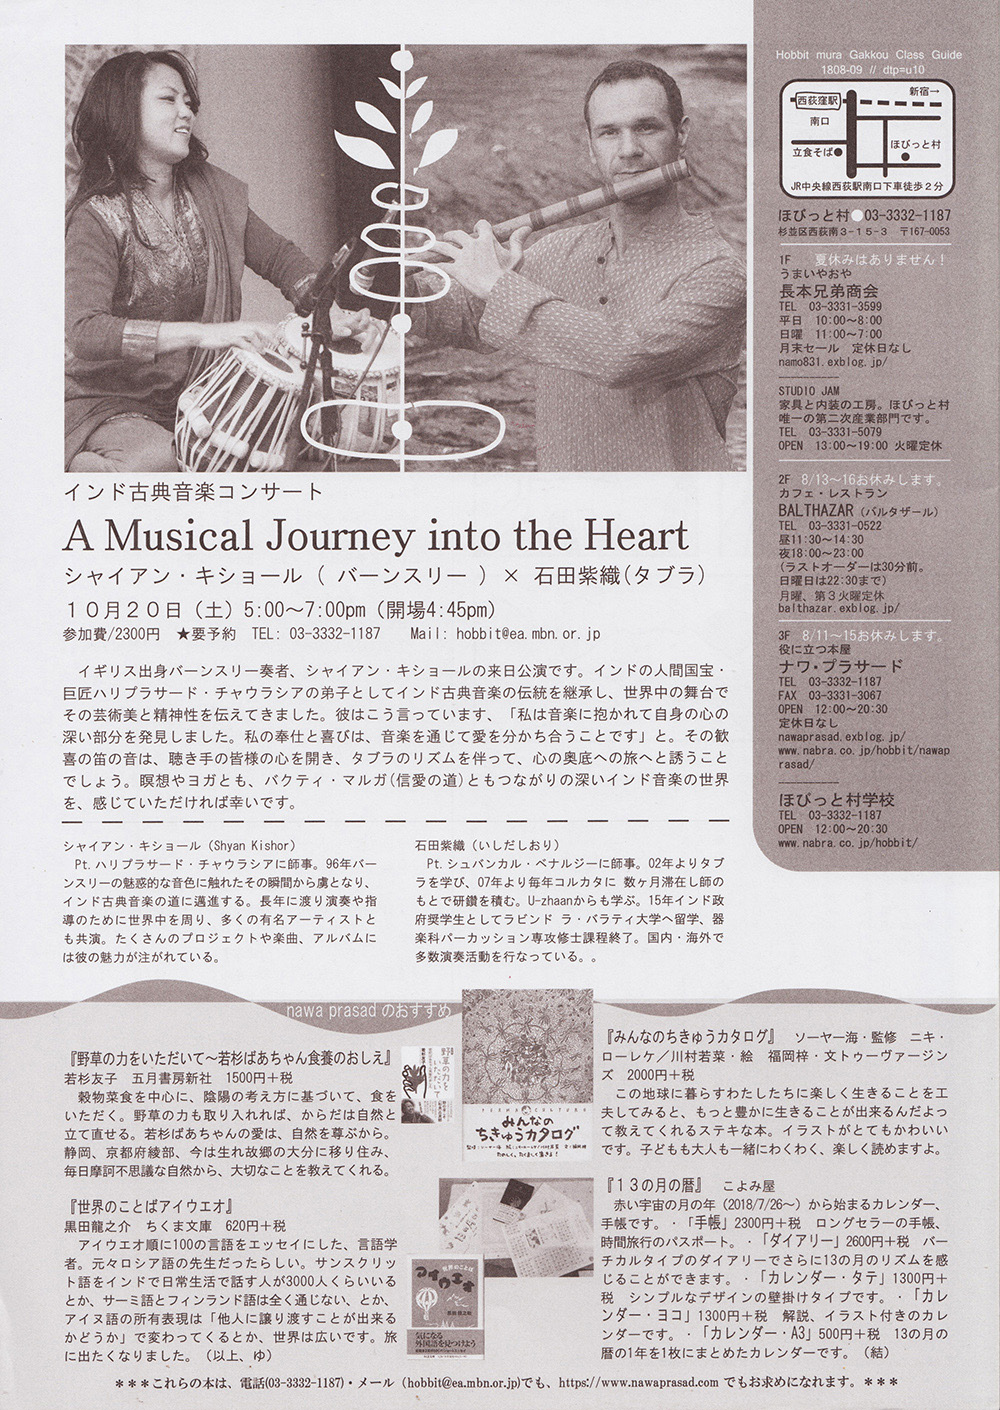 18.10.20　A Musical Journey into the Heart